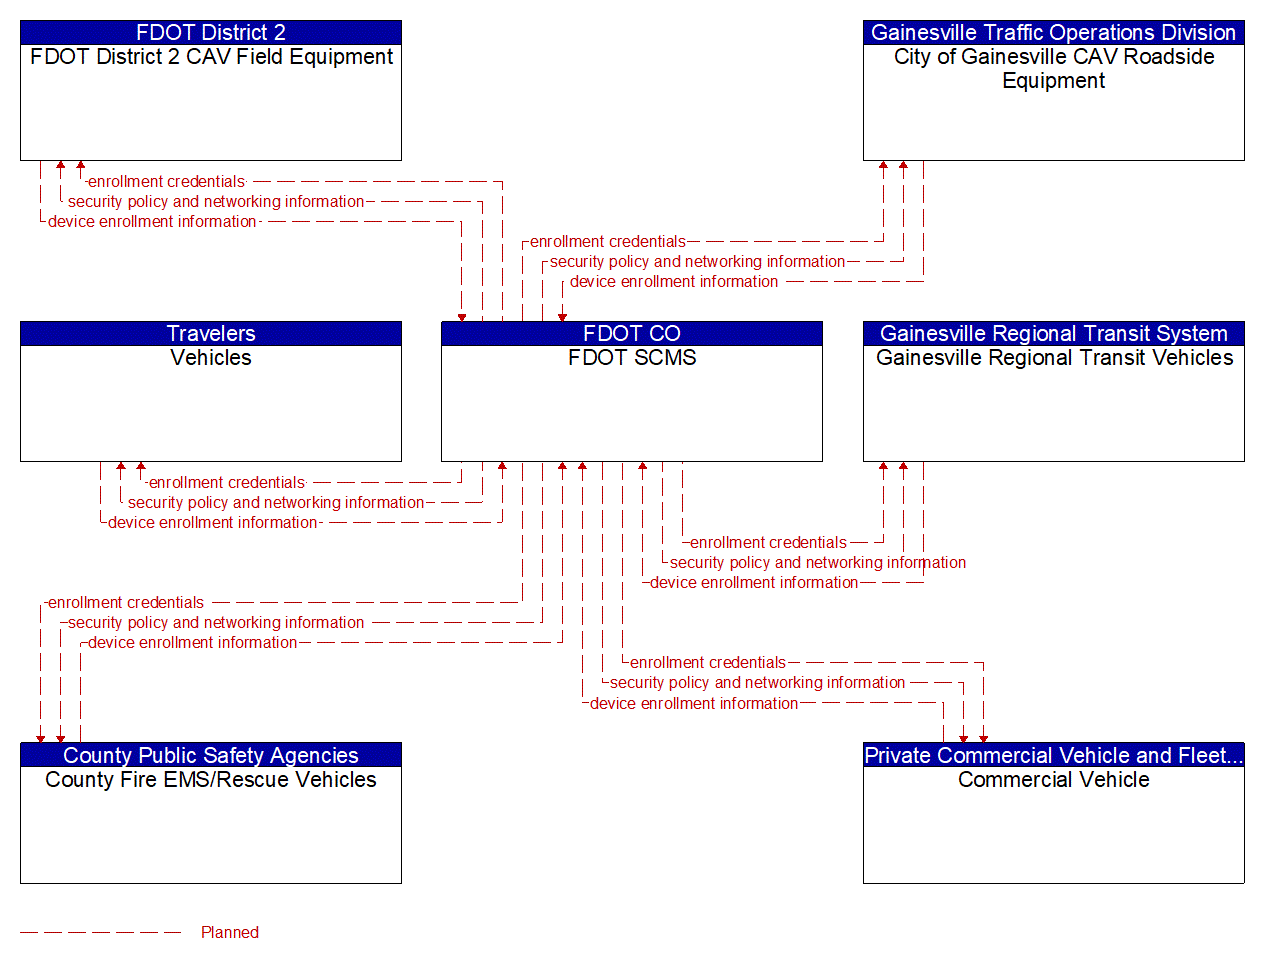 Service Graphic: Device Certification and Enrollment (I-75 FRAME)